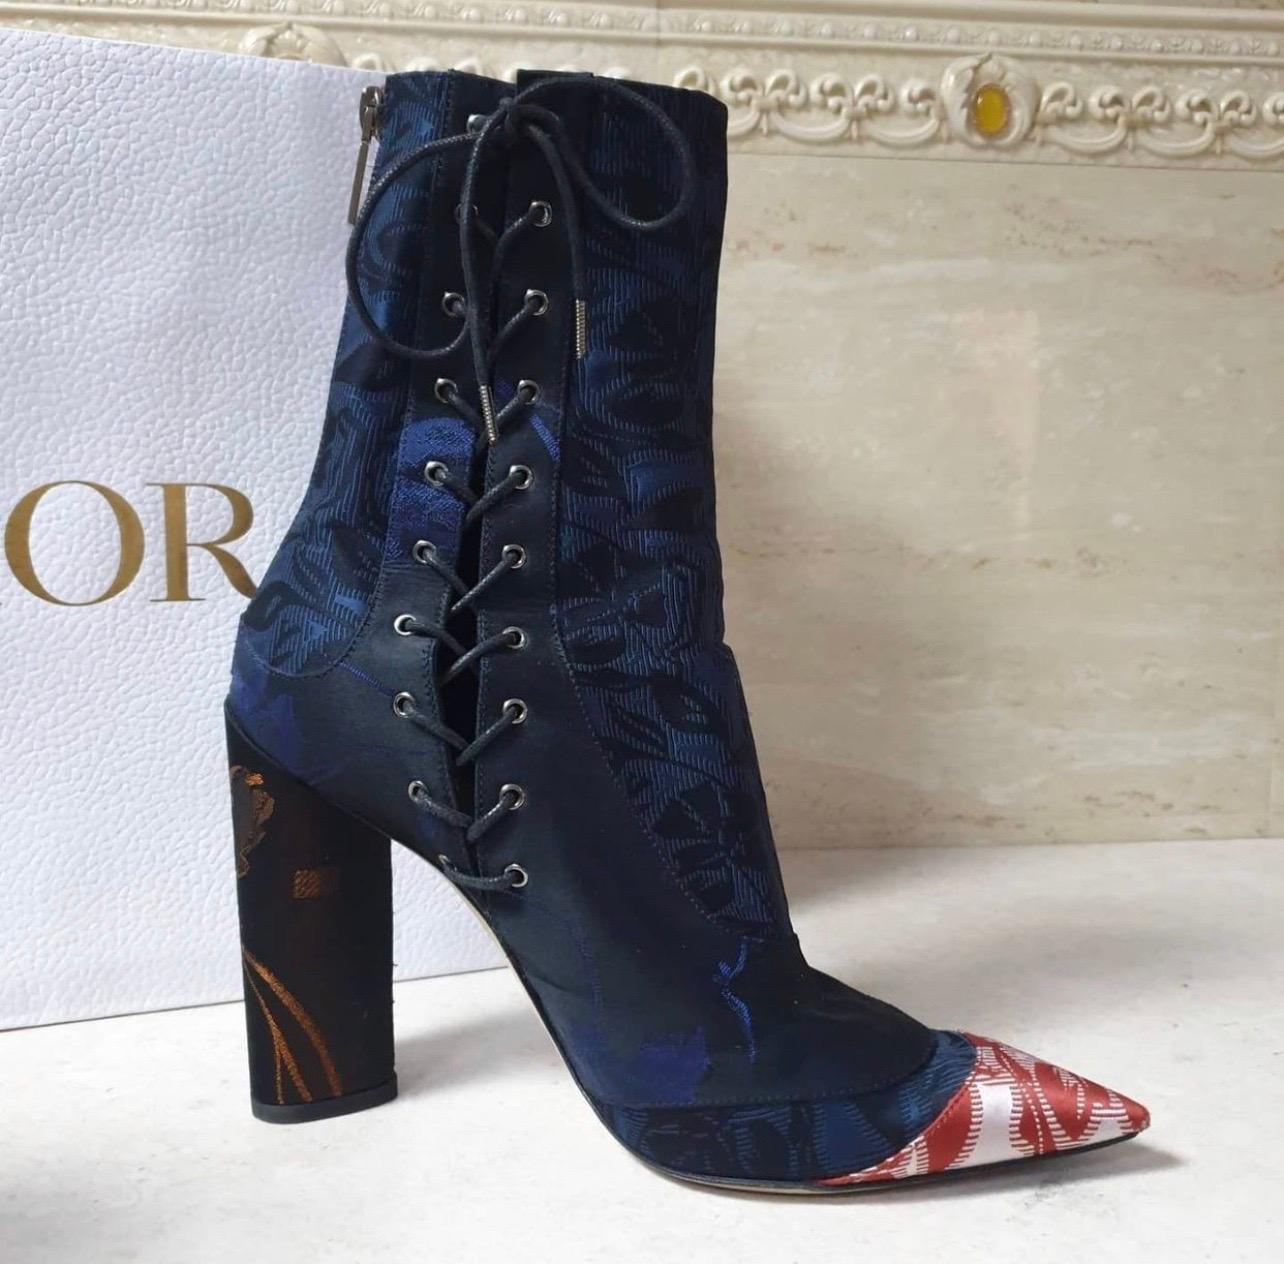 Christian Dior pointed toe ankle boots are nothing but perfect! Blue and Black floral embroidered fabric uppers and a red and white pointed toe, make for a chic look. The sides have lace up closures and a rear zip for easy on and off. Perfect for